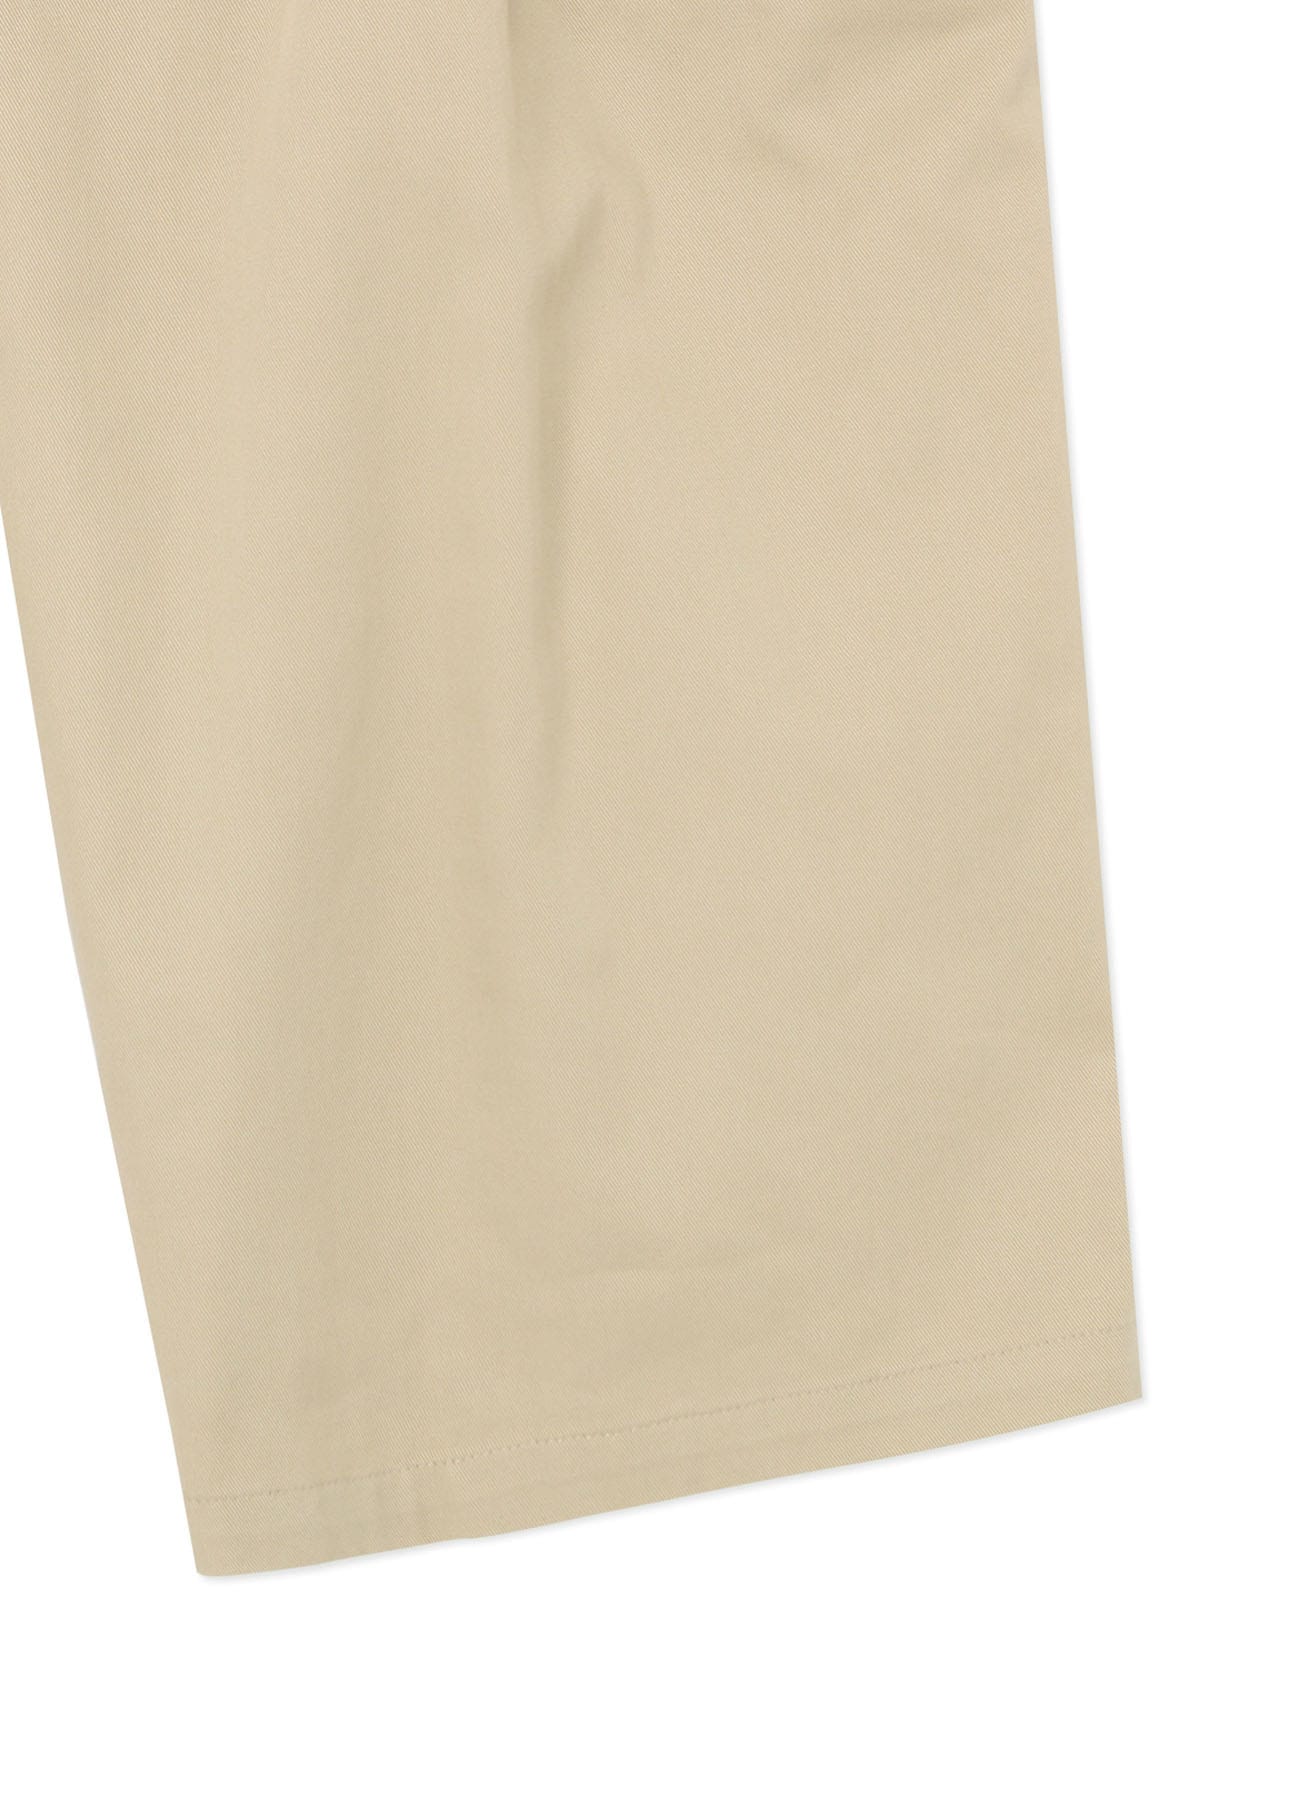 Y's BORN PRODUCT] COTTON TWILL LONG POCKET PANTS(XS Beige): Y's 